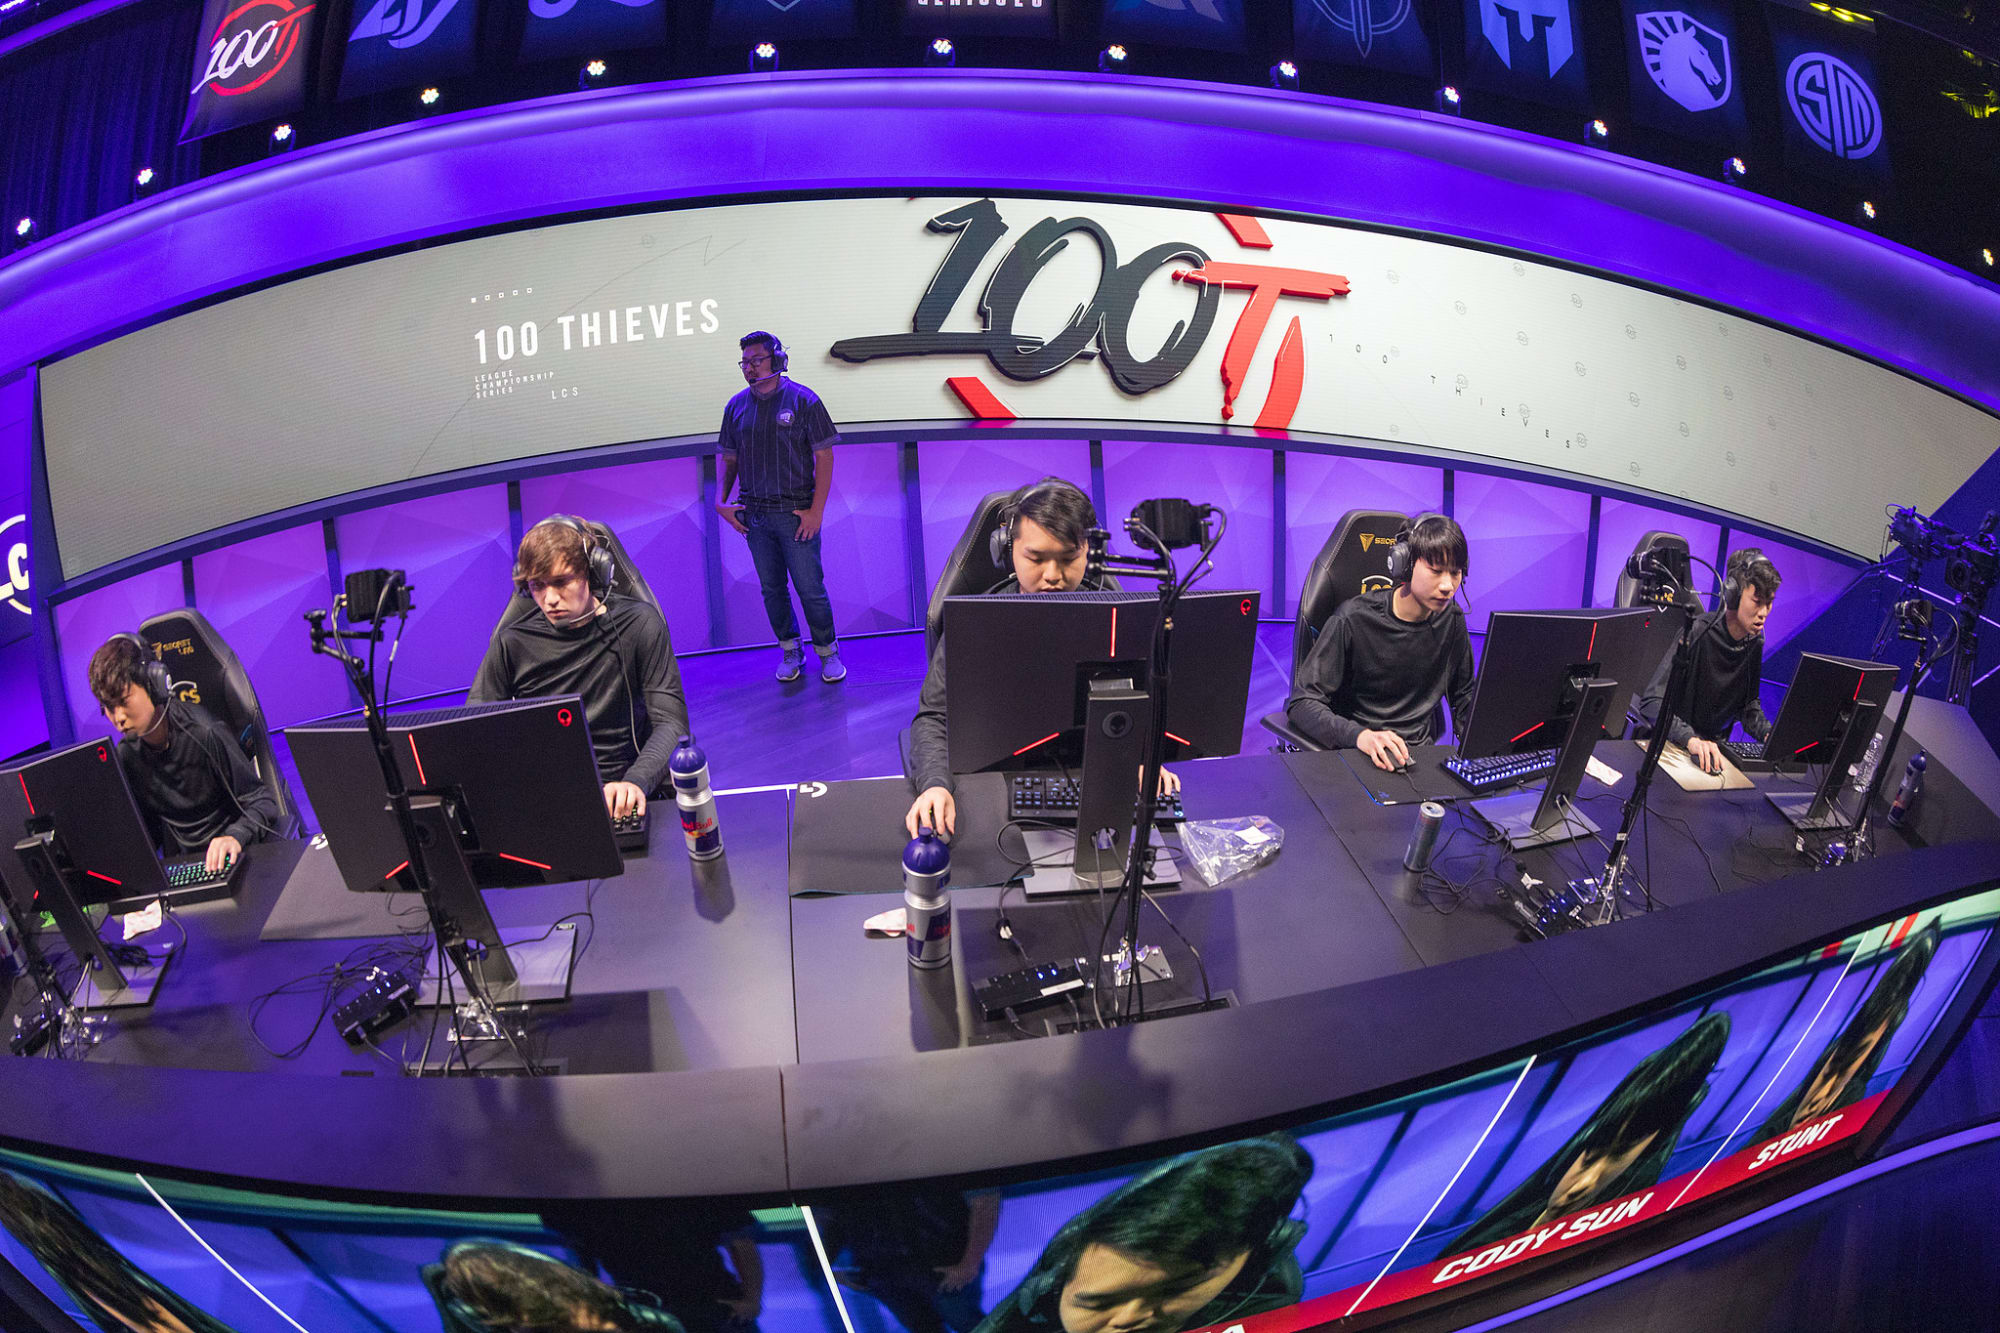 League of Legends: 100 Thieves Next Playoffs Run Ends Early